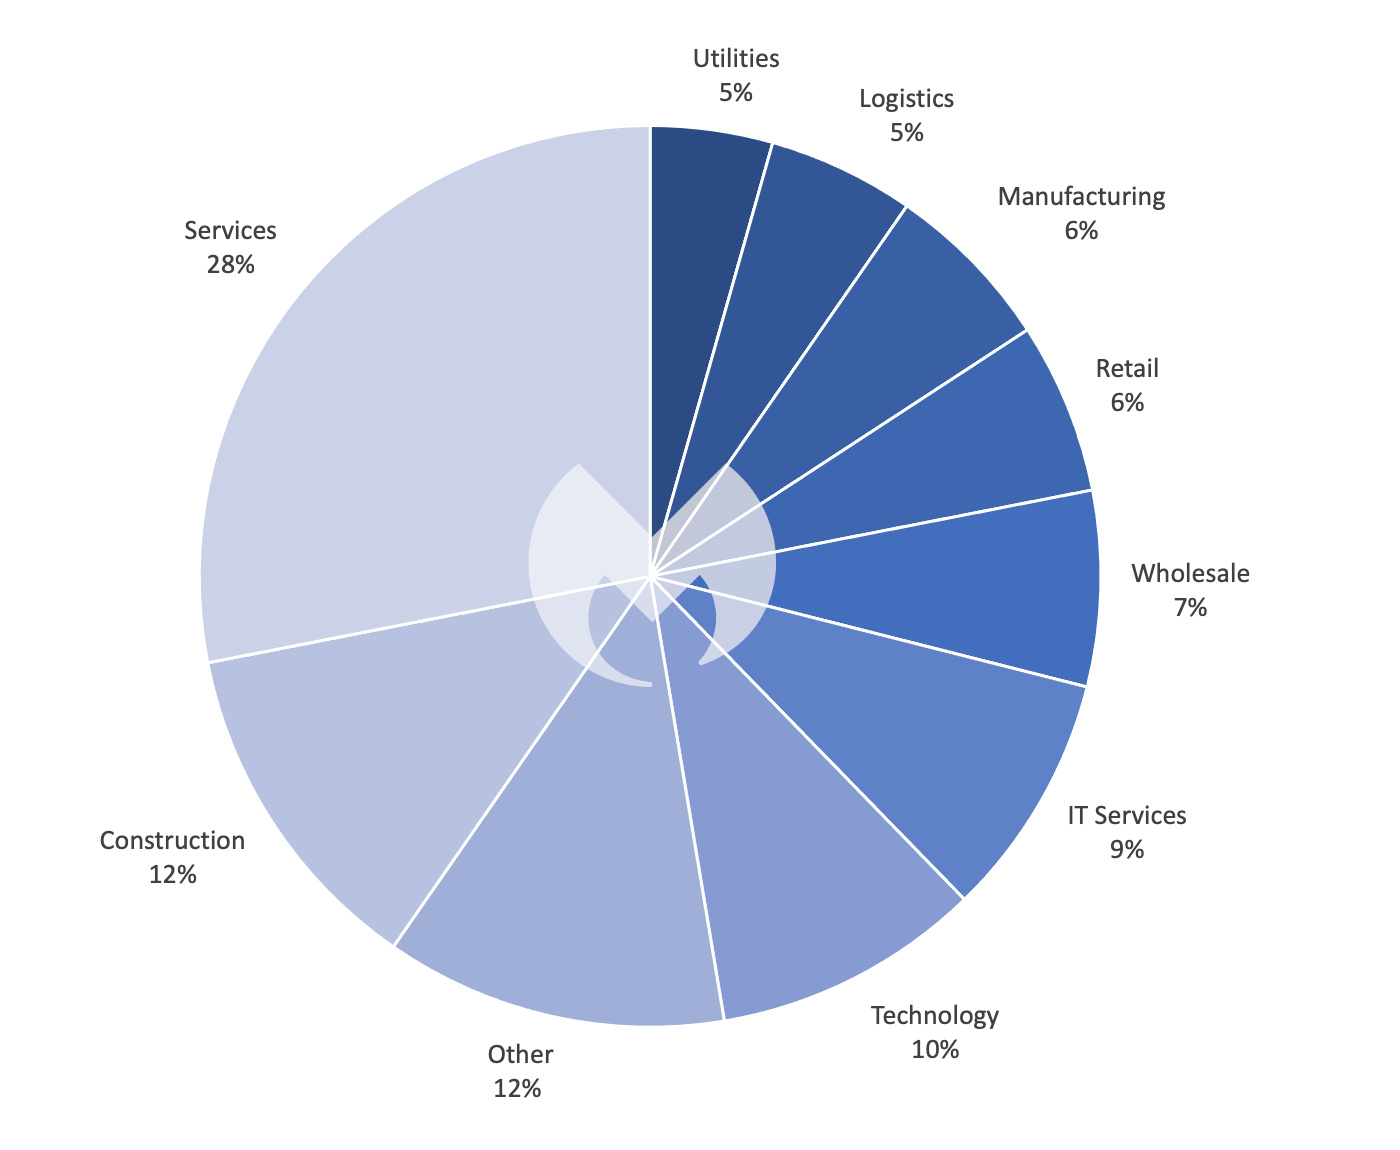 Known ransomware attacks by industry sector in Germany, April 2022 - March 2023